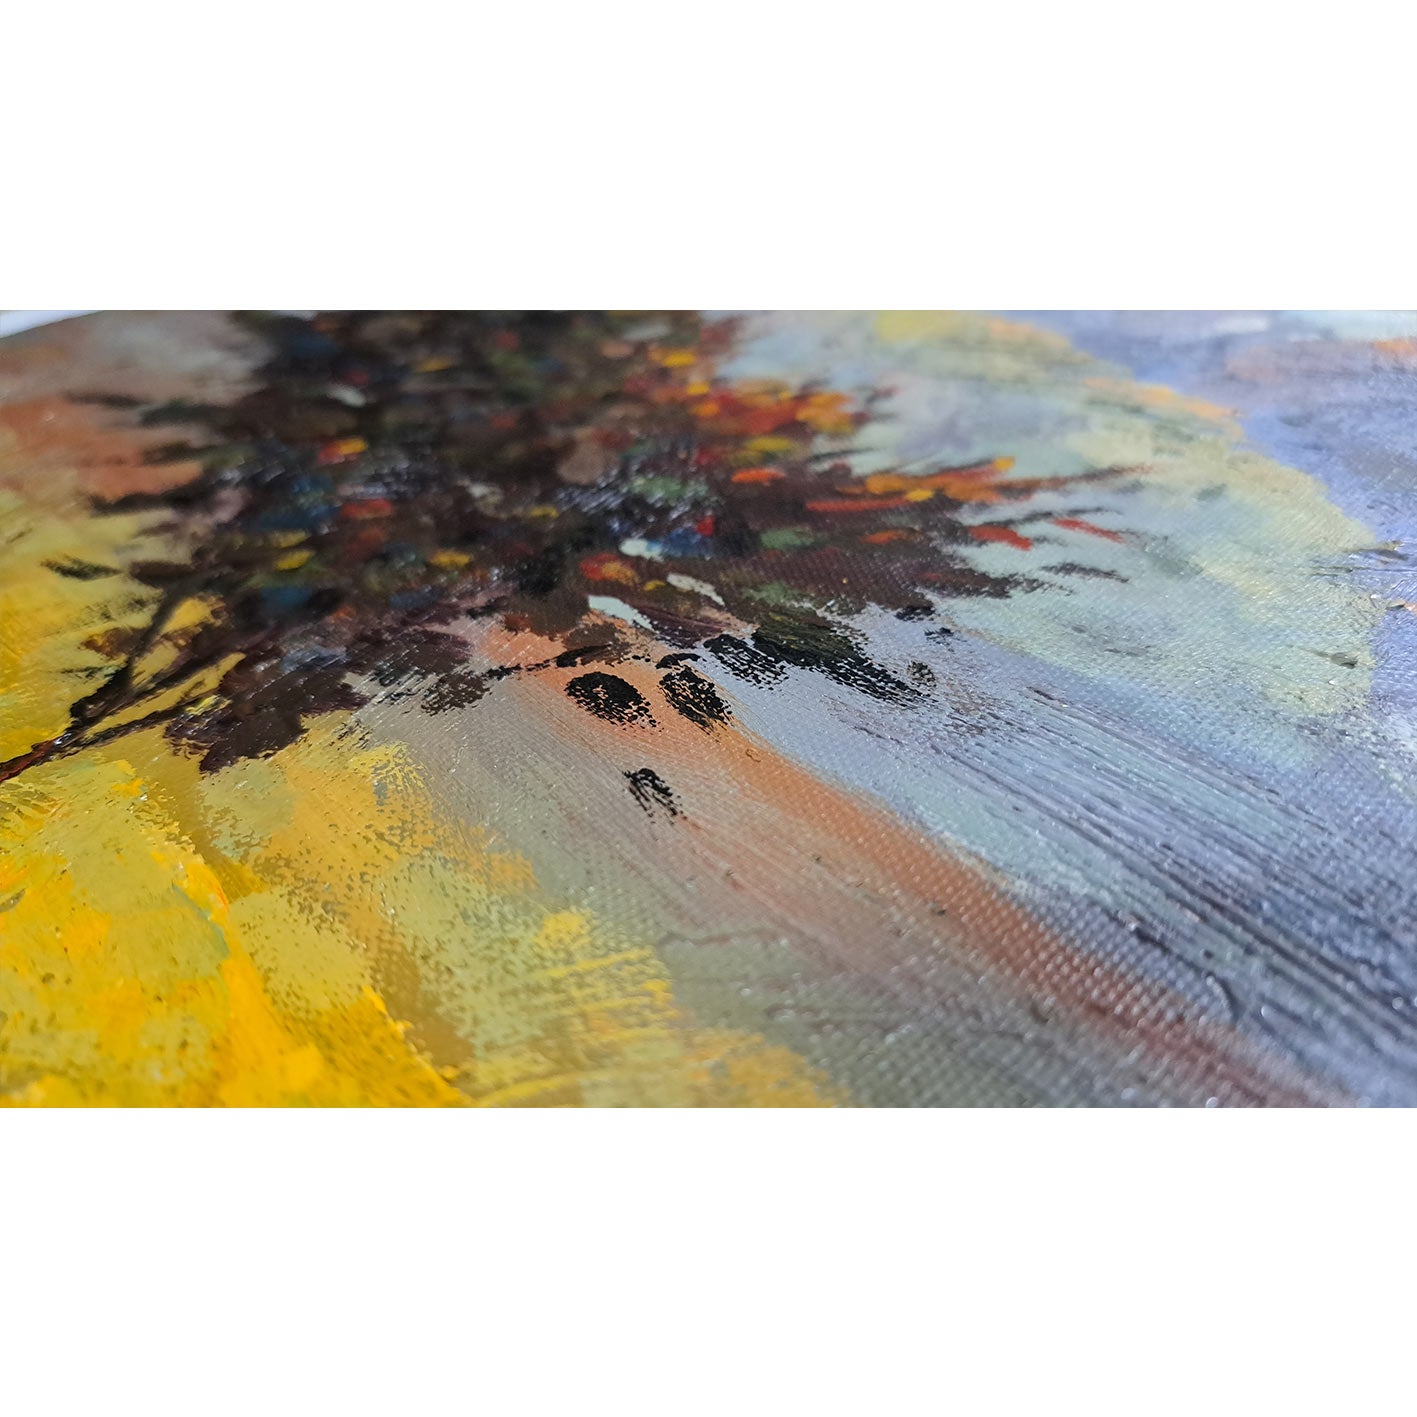 Yellow Landscape Diptych Painting 60X50 cm [2 pieces]